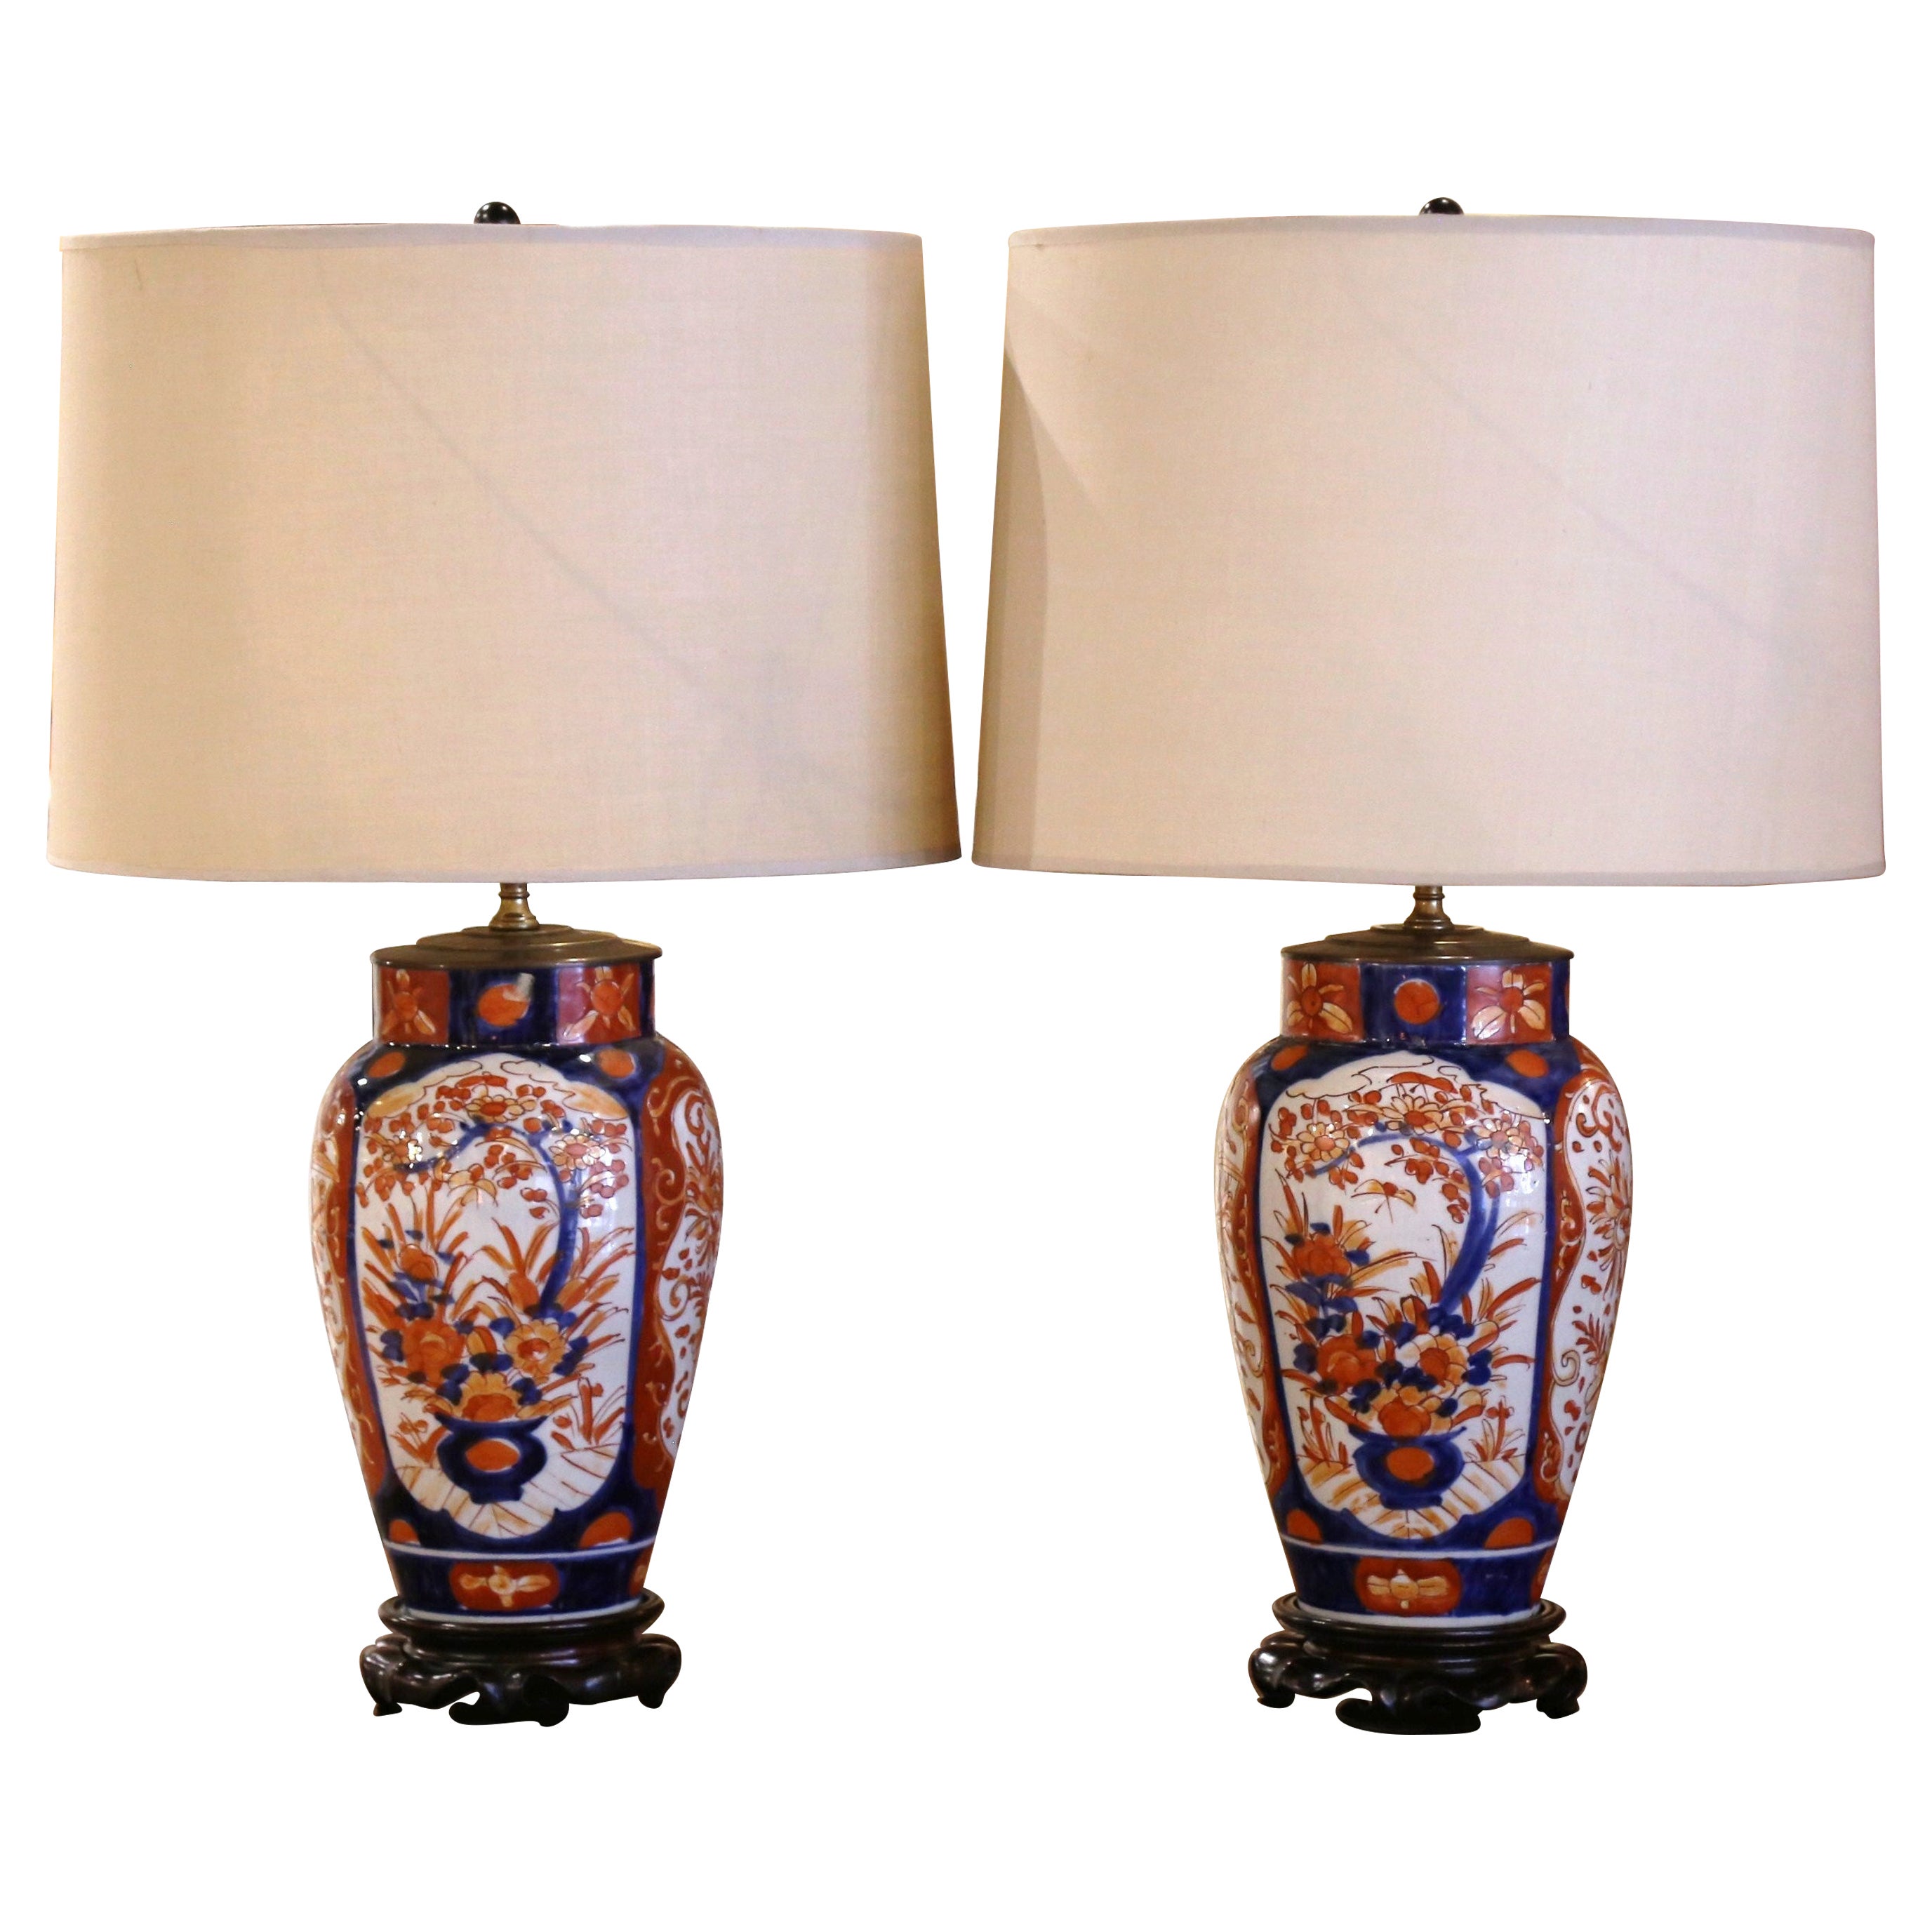 Pair of Early 20th Century Japanese Imari Painted Porcelain & Brass Table Lamps 